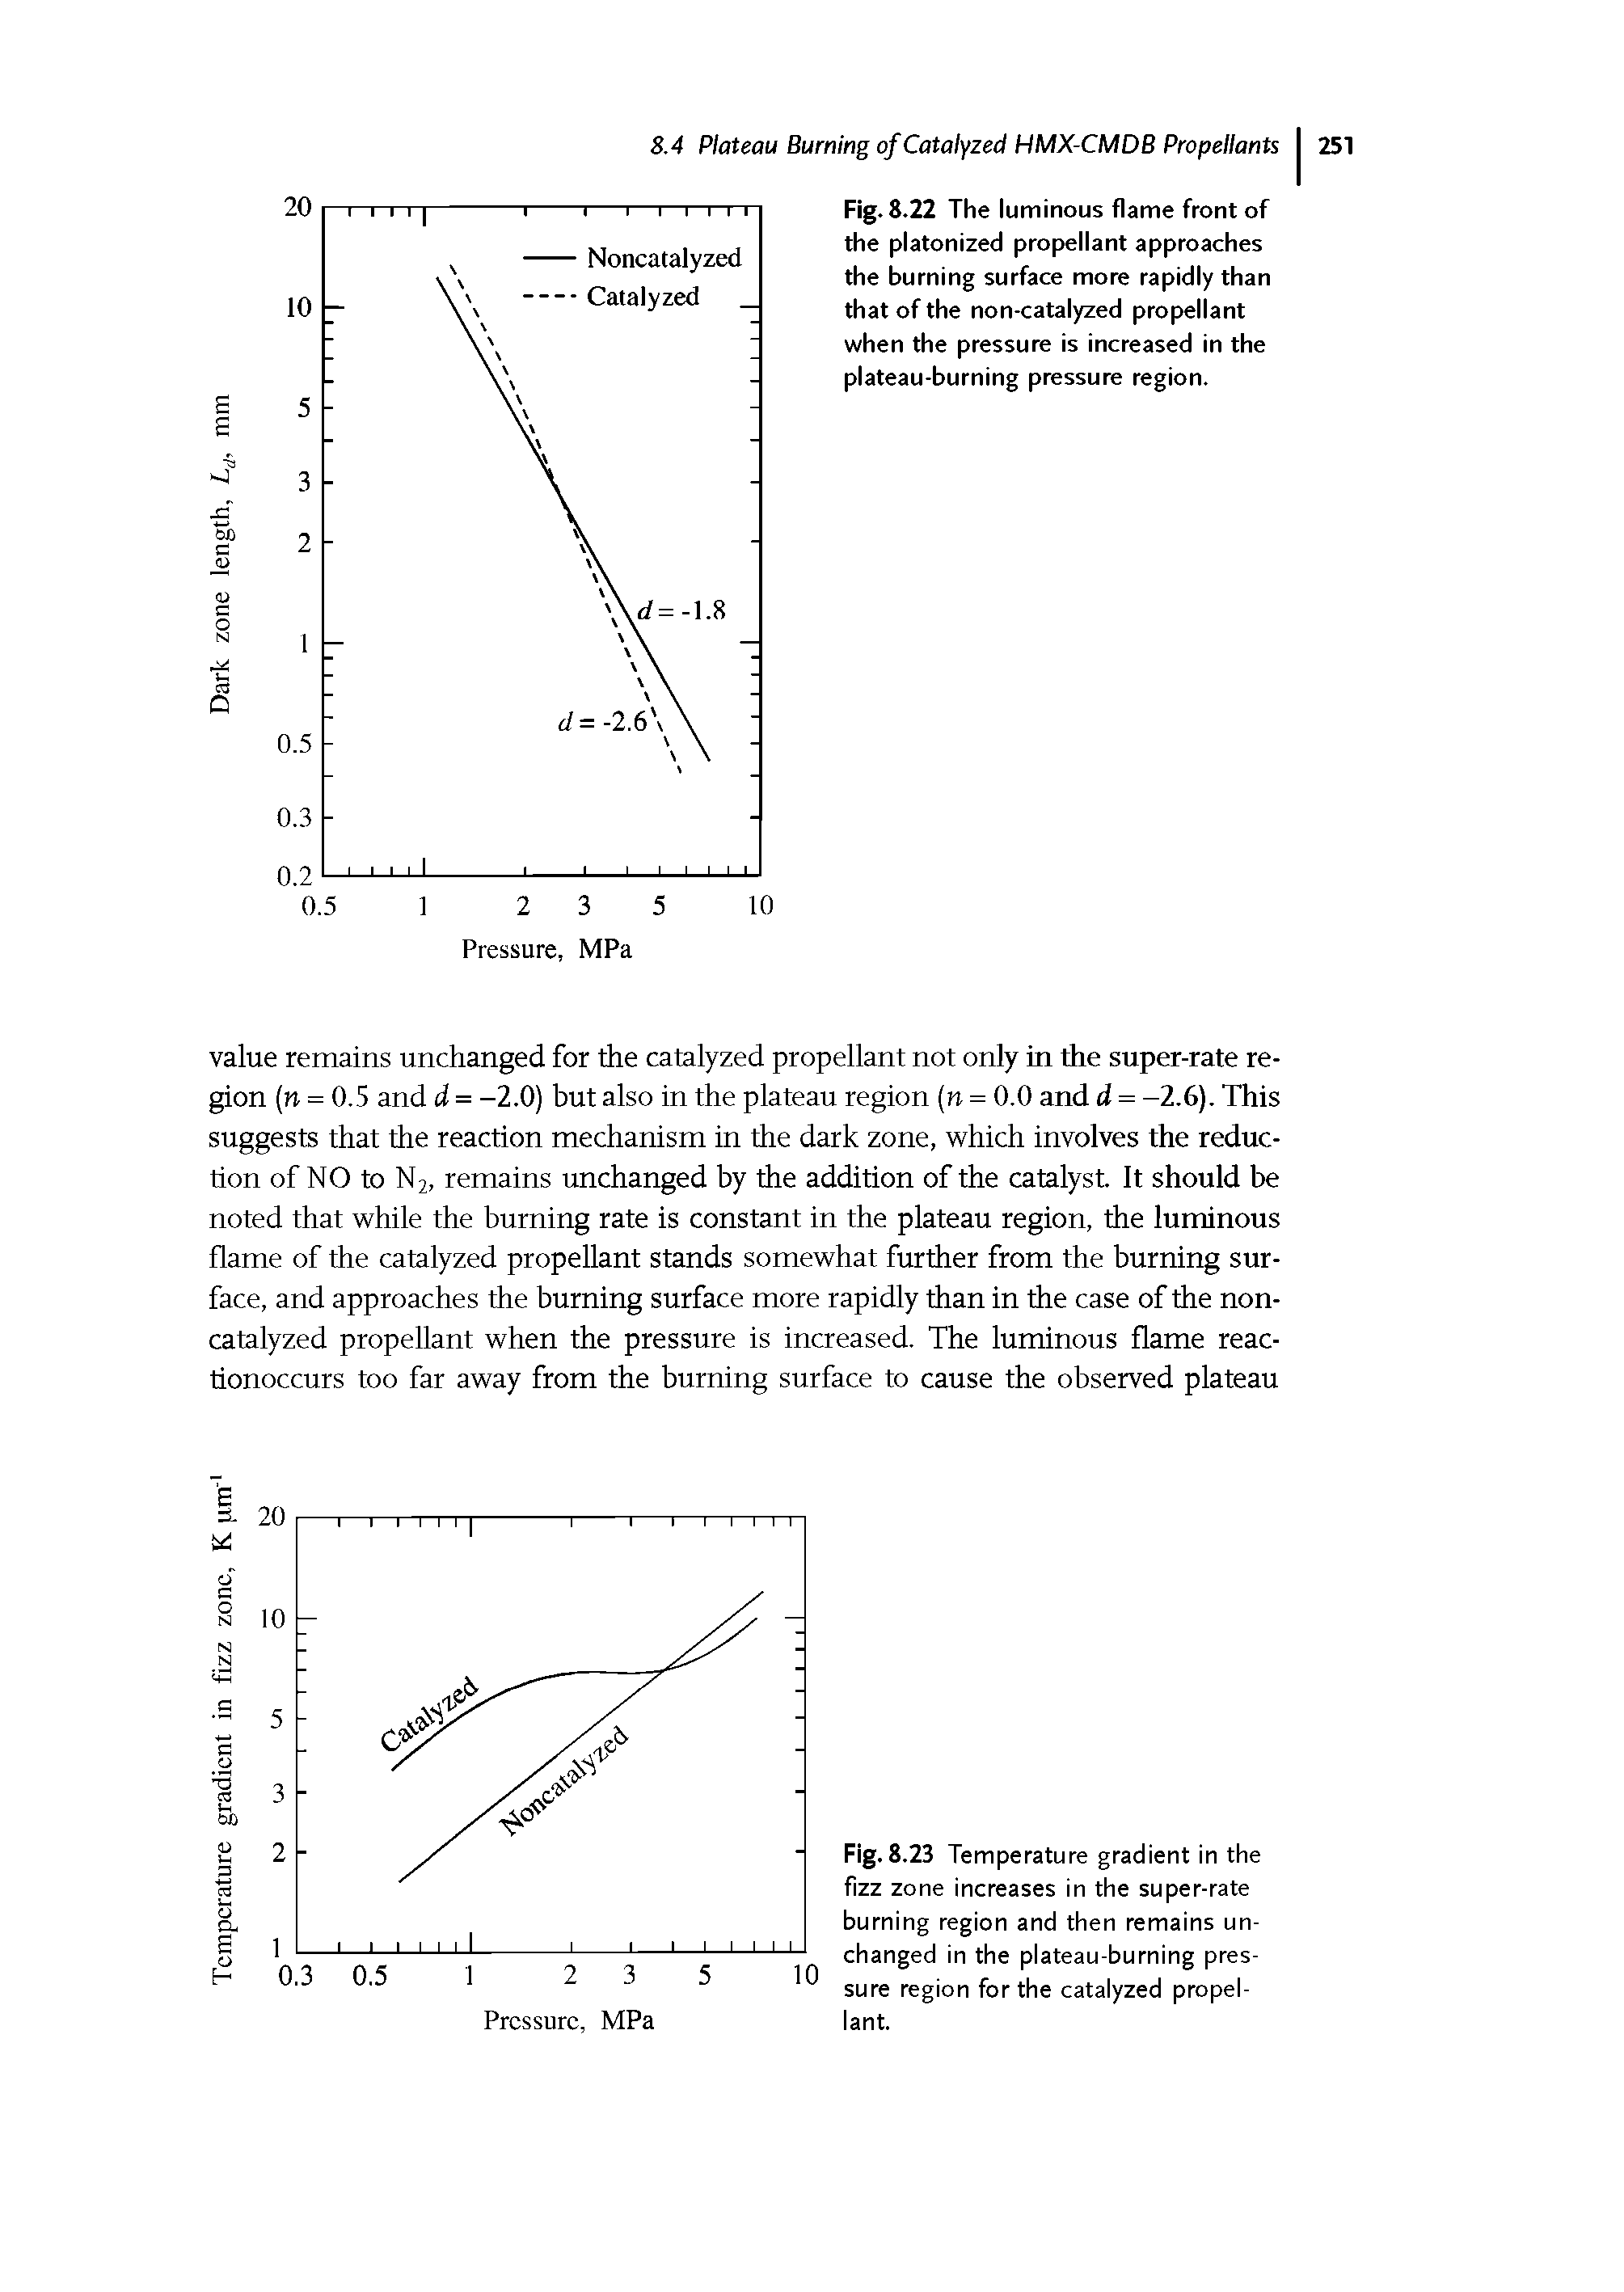 Fig. 8. 23 Temperature gradient in the fizz zone increases in the super-rate burning region and then remains unchanged in the plateau-burning pressure region for the catalyzed propellant.